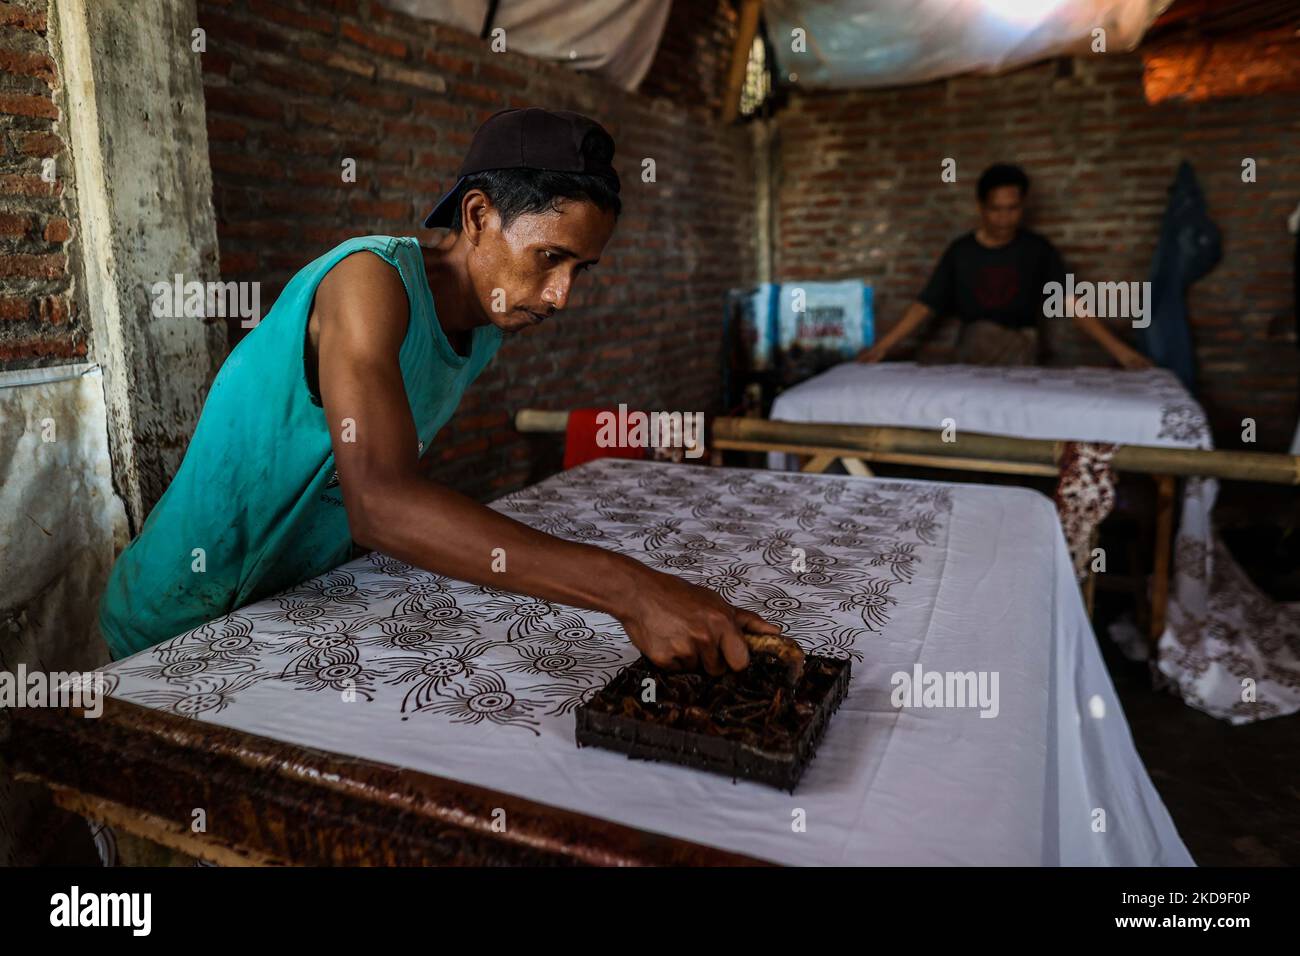 A worker uses copper stamps to imprint patterns onto traditional Javanese textile called batik at low-lying Jeruk Sari neighborhood in coastal Pekalongan, Central Java, Indonesia, June 5, 2021. An area in which almost every available space is used for batik production, with a high level of poverty, vulnerable to both rising sea levels and high river peak flows. Pekalongan is a city known for batik, a traditional Indonesian method of using wax to resist water-based dyes to depict patterns and drawings, usually on fabric. This textile has traditionally been crafted by hand in family workshops an Stock Photo